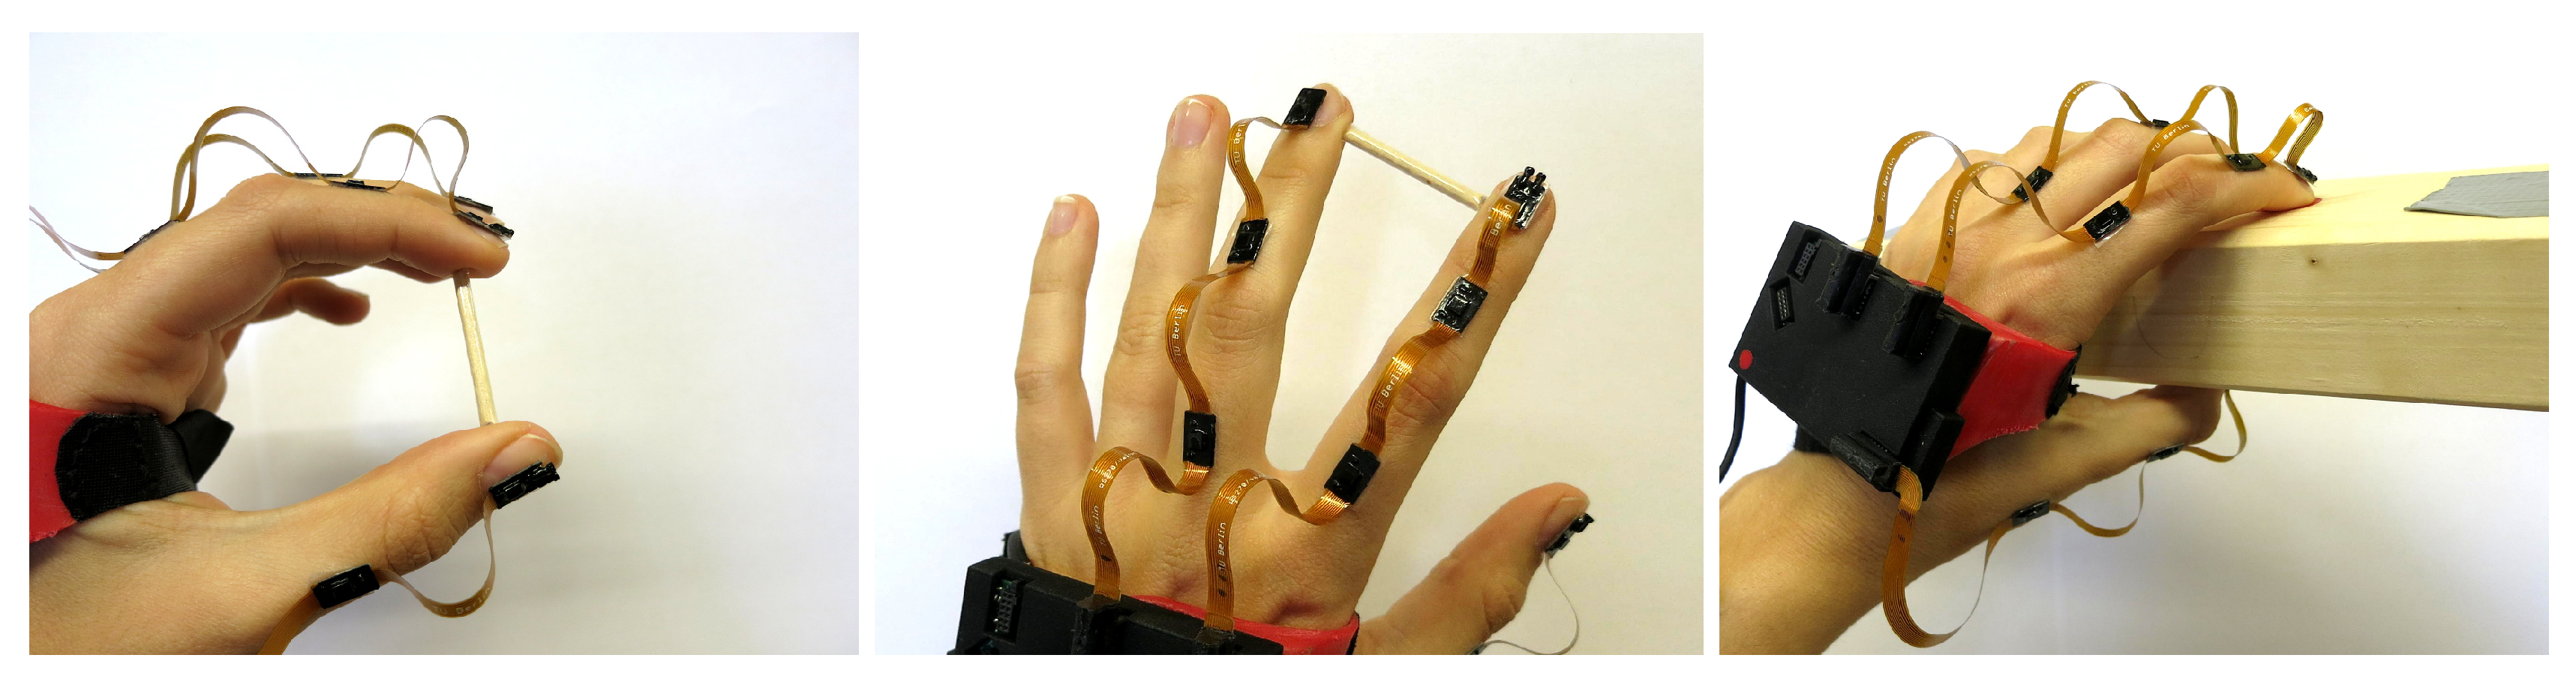 Sensors | Free Full-Text | A Tangible Solution for Hand Motion Tracking in  Clinical Applications | HTML